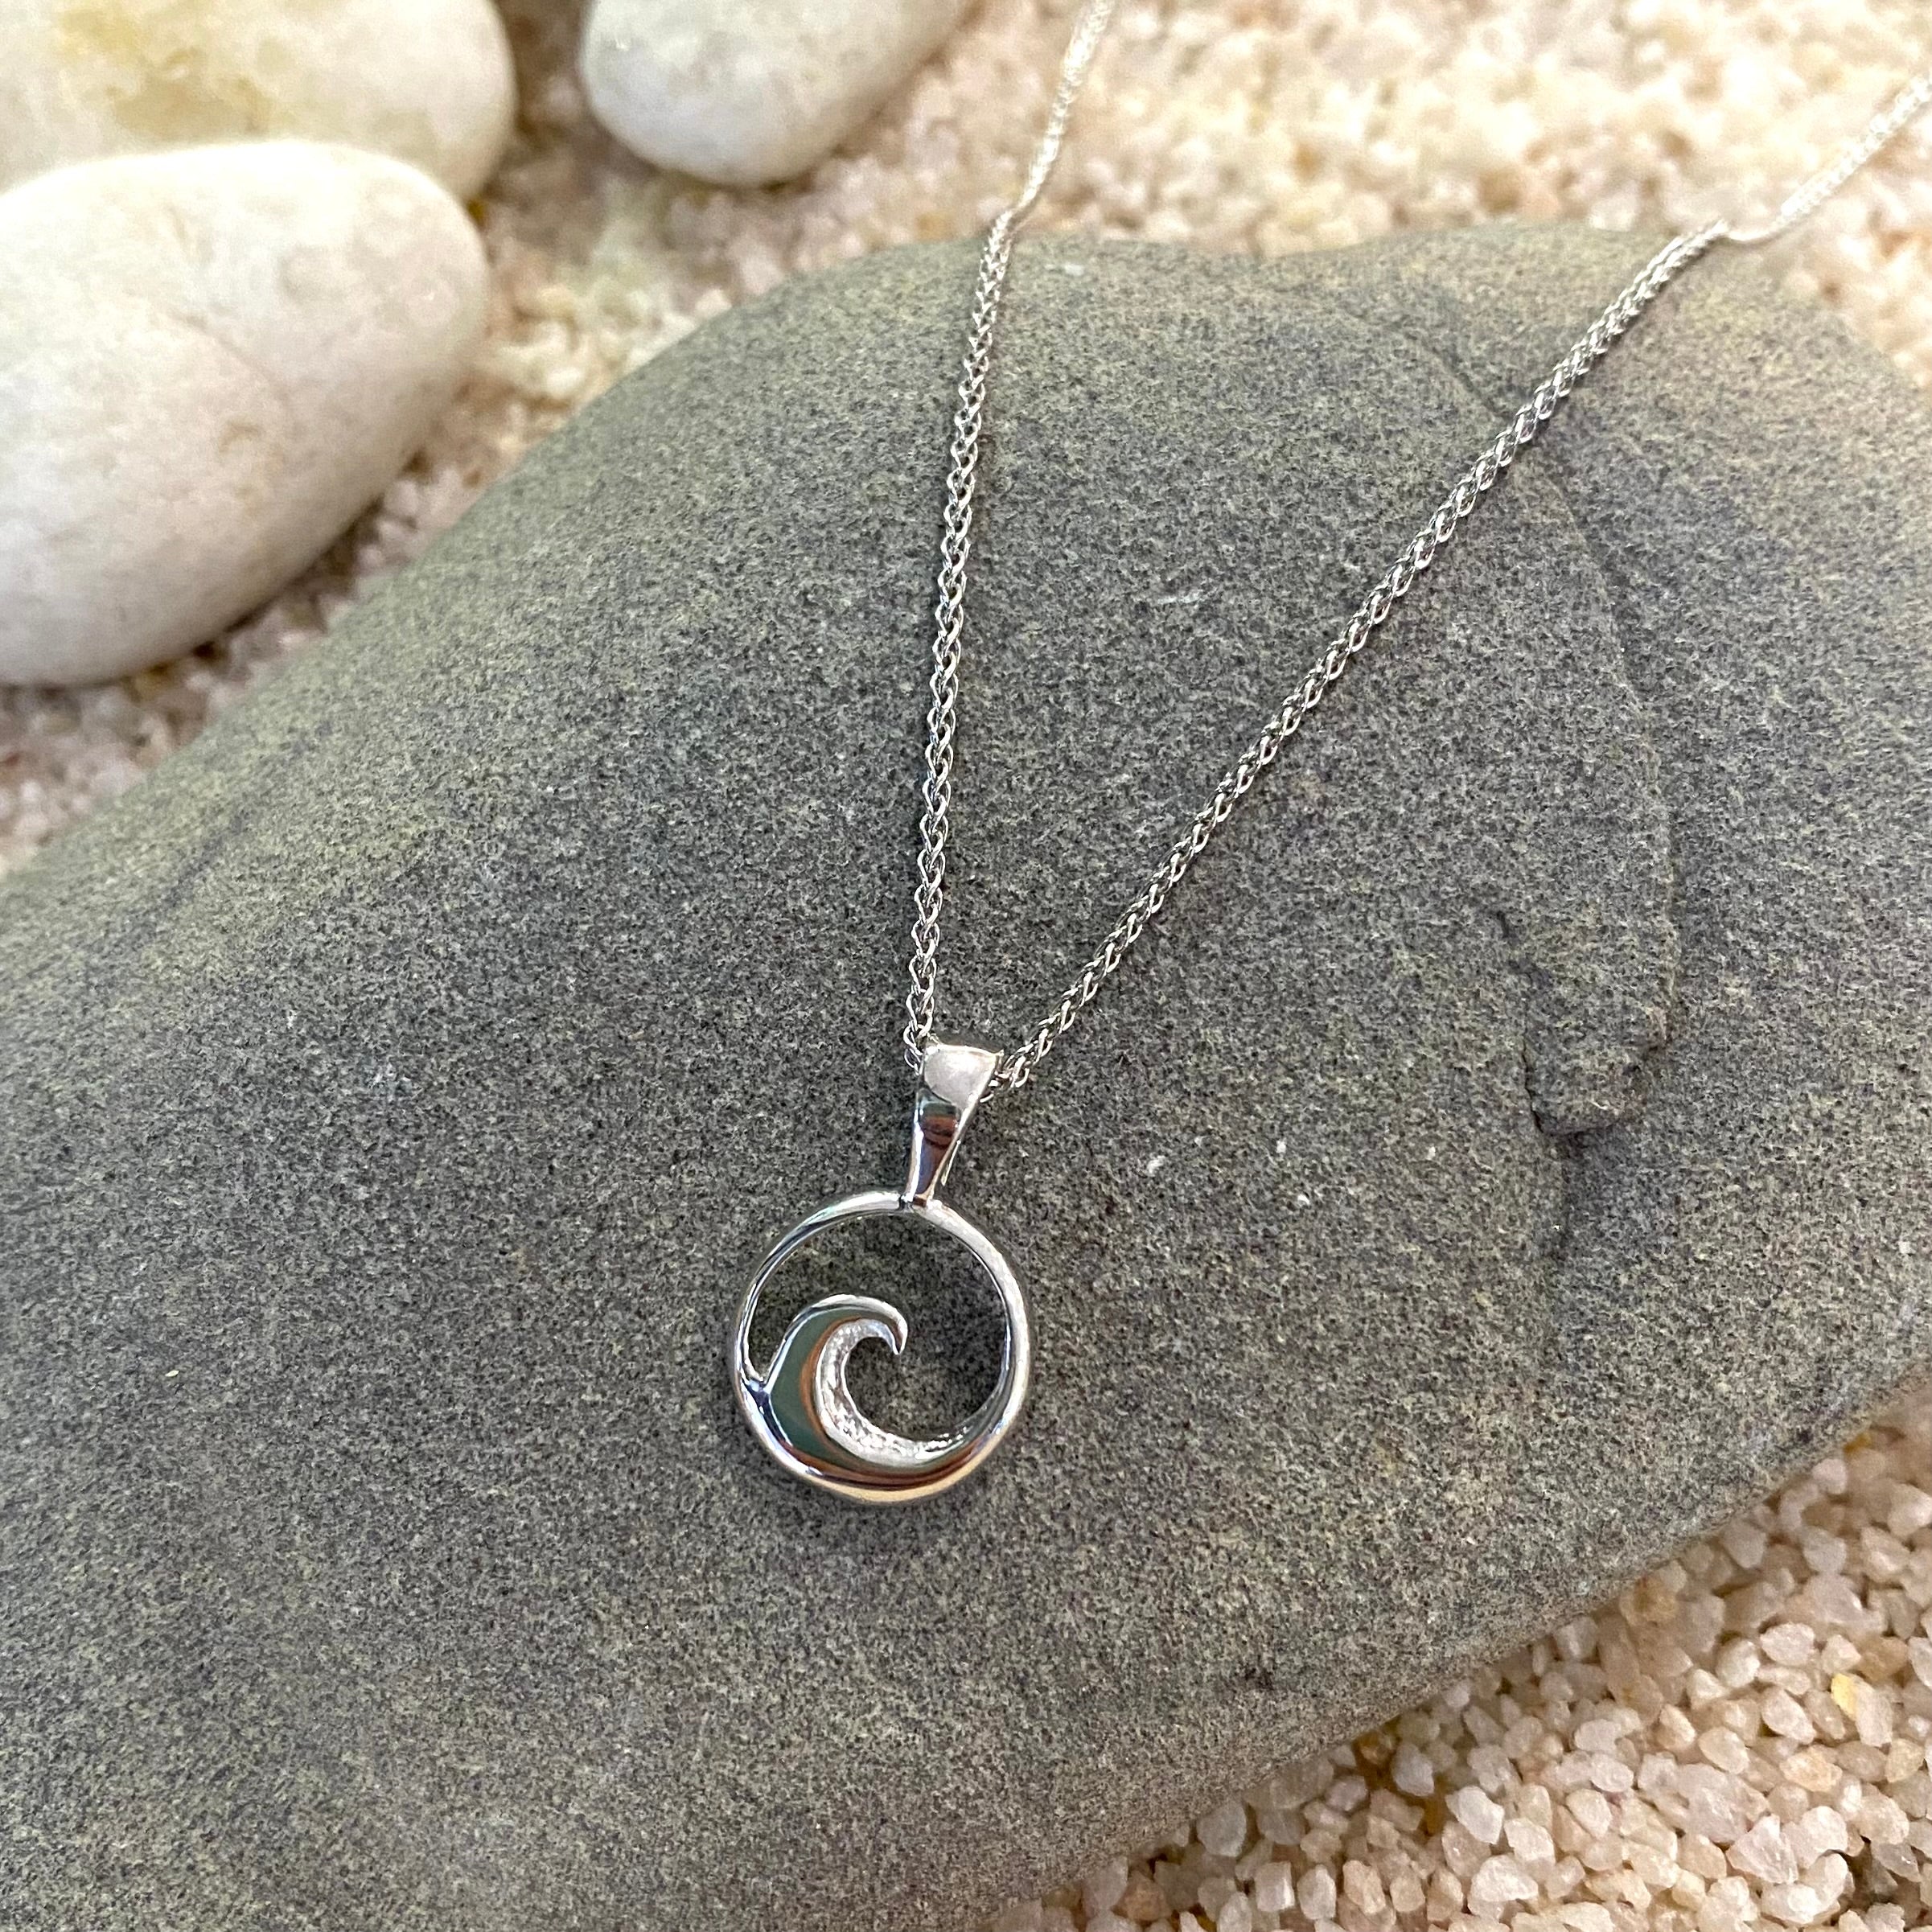 Delicate Sterling Silver Wave Pendant with White Mother of Pearl & Cub